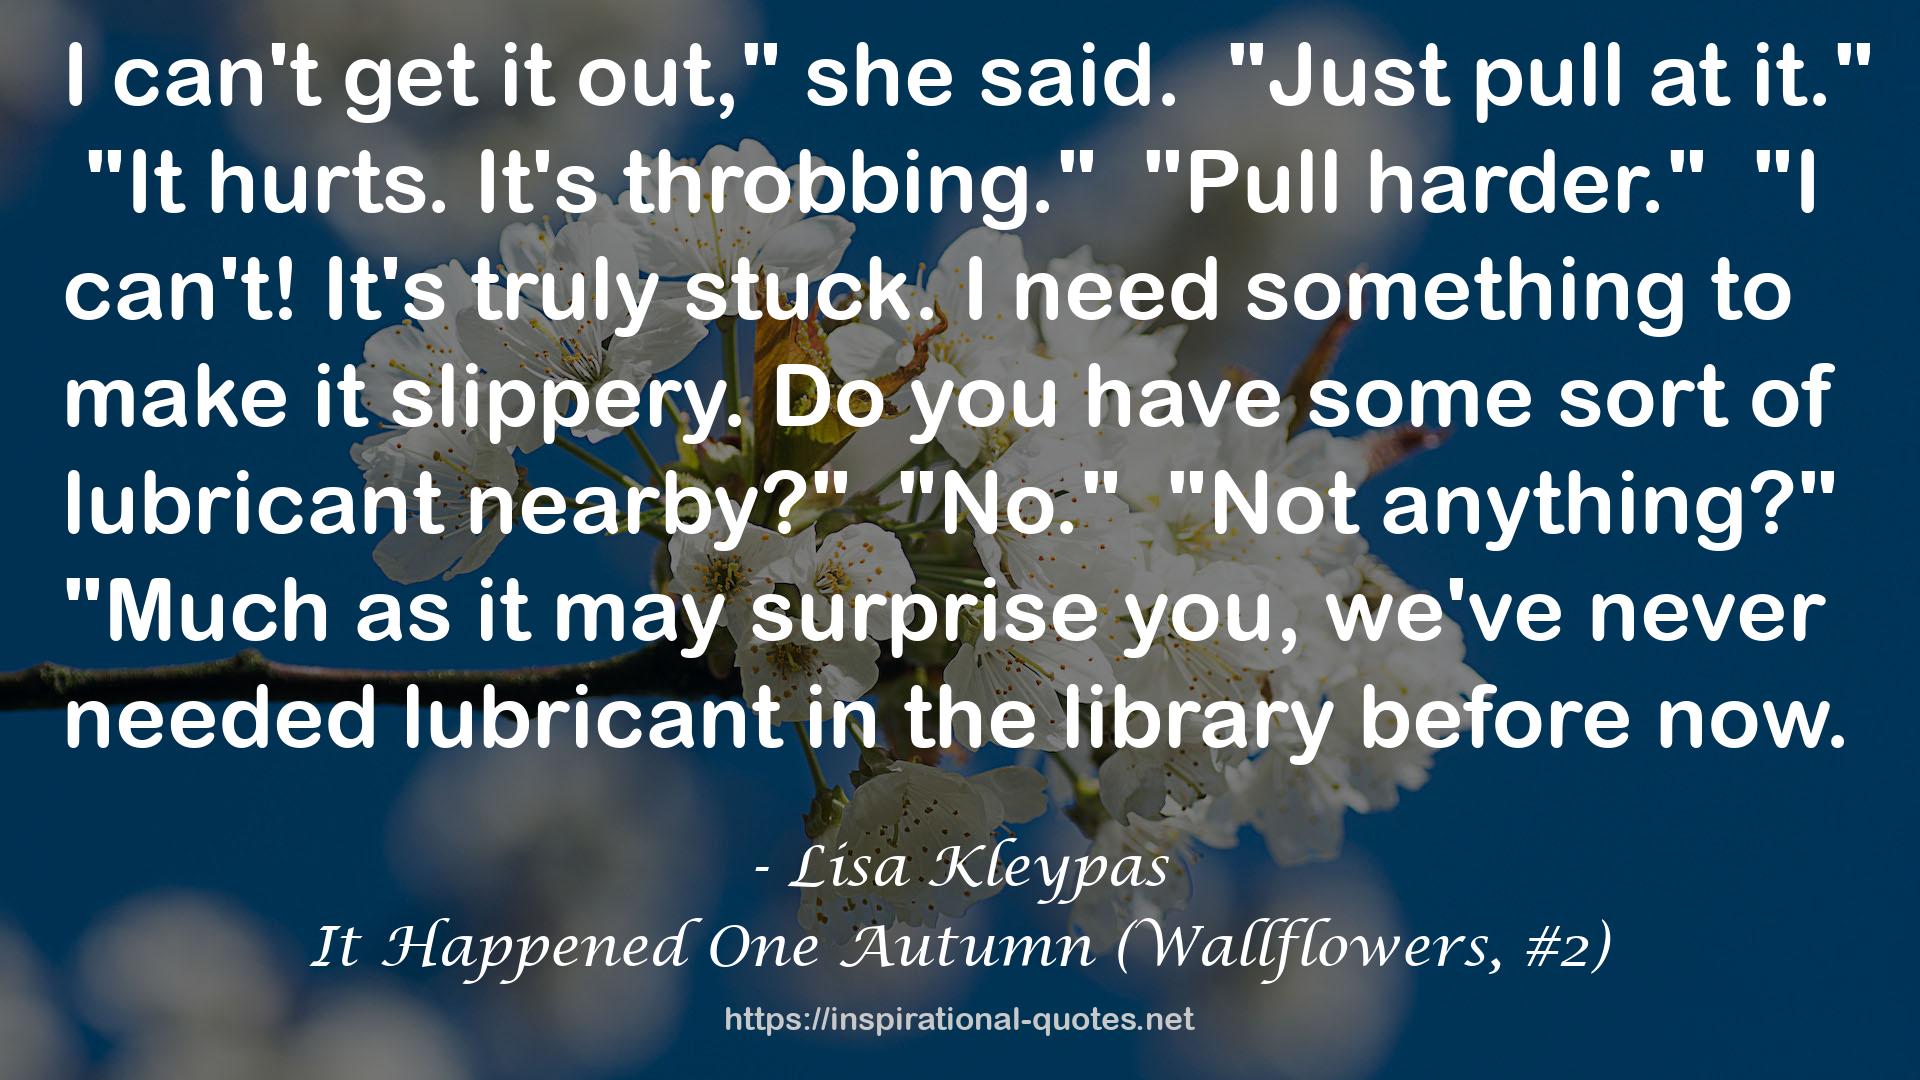 It Happened One Autumn (Wallflowers, #2) QUOTES